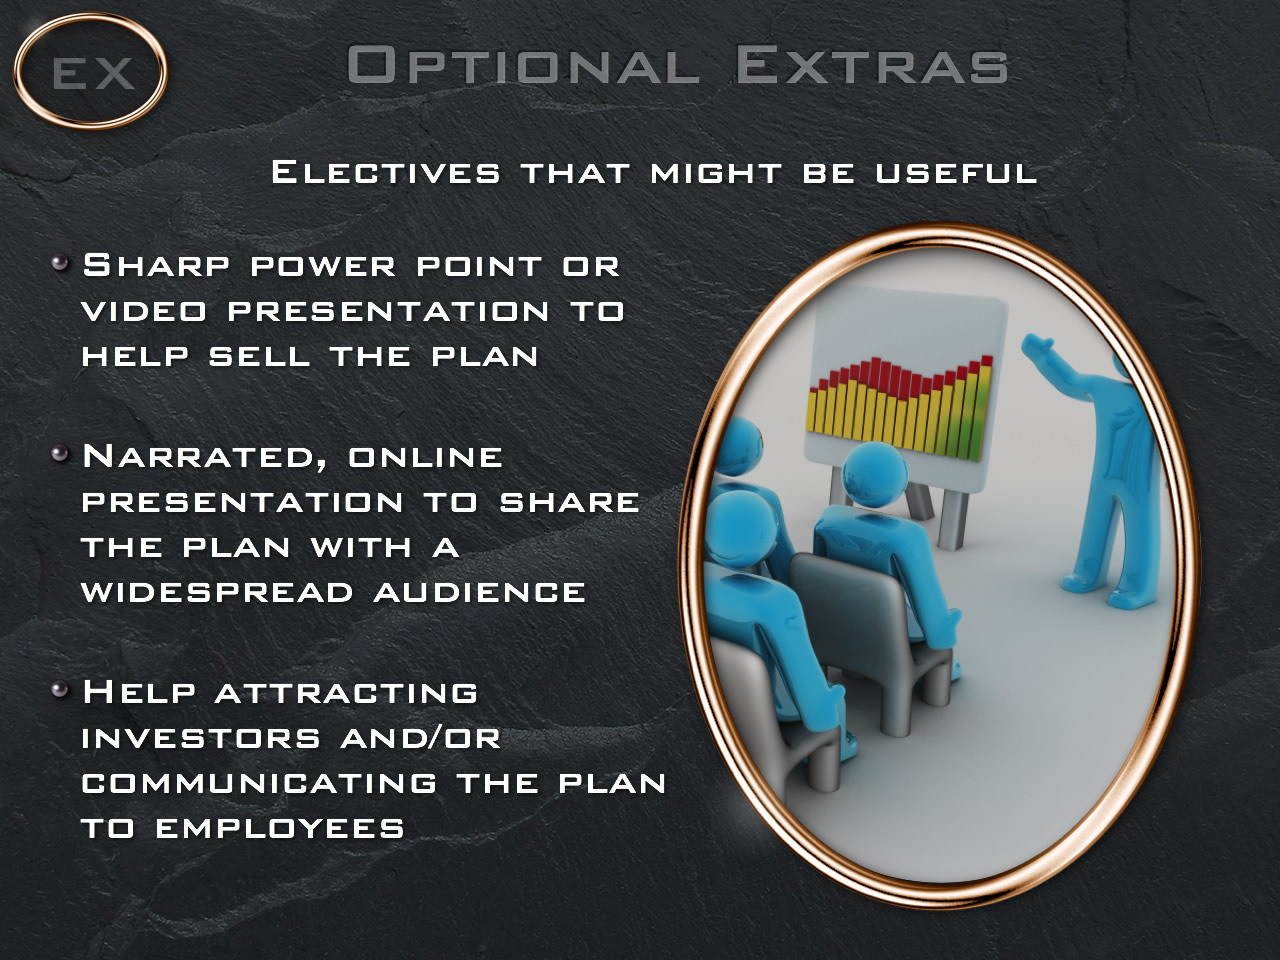 Creating the extras mostly to communicate the plan. Power Point or Keynote presentation, help attracting investors